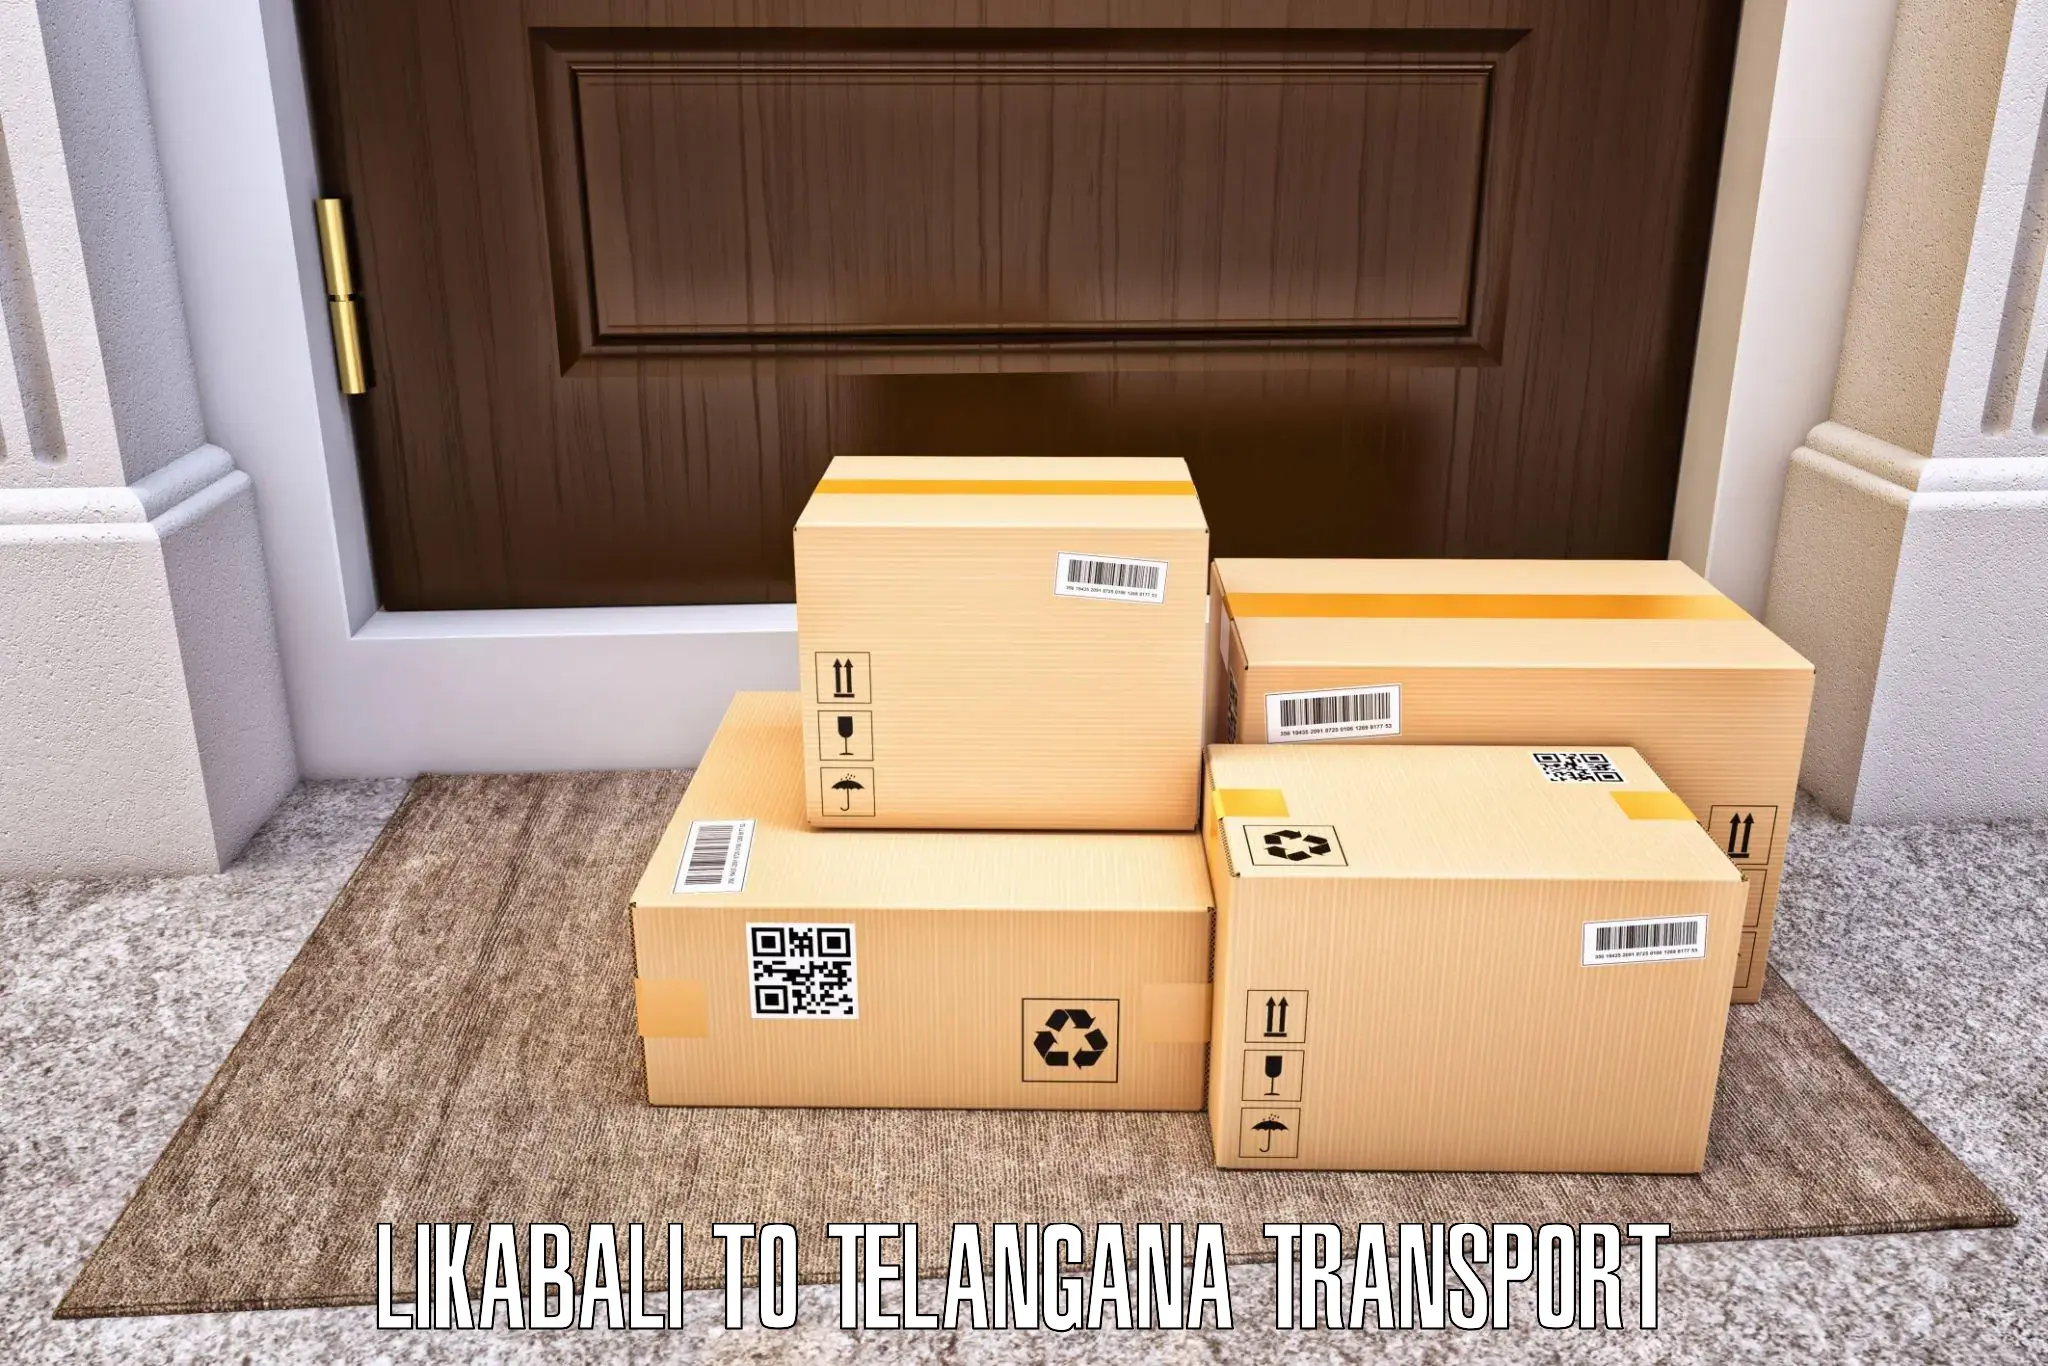 Delivery service Likabali to Hyderabad